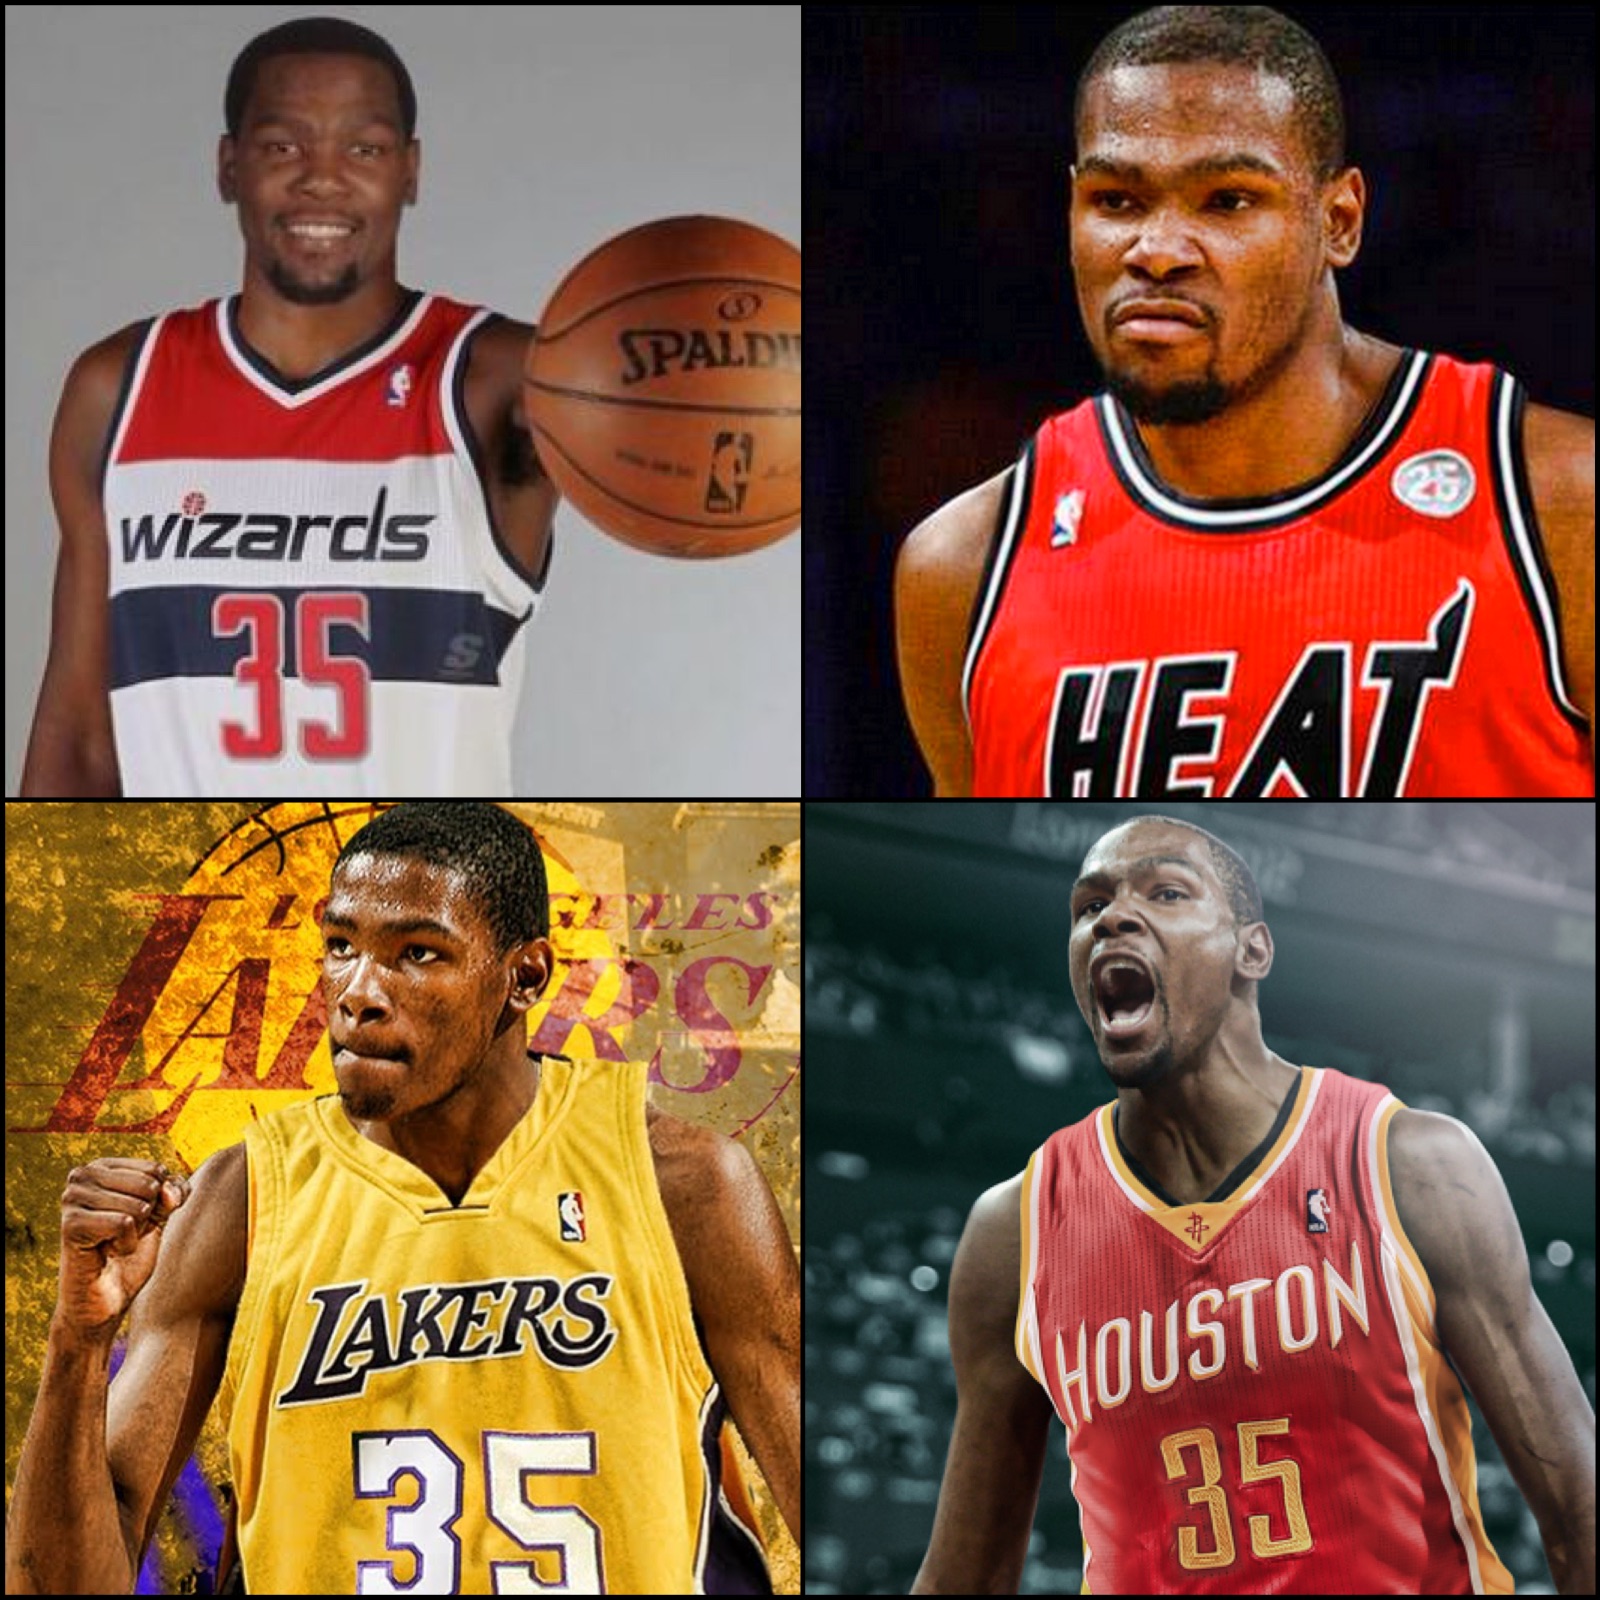 kevin durant in heat jersey